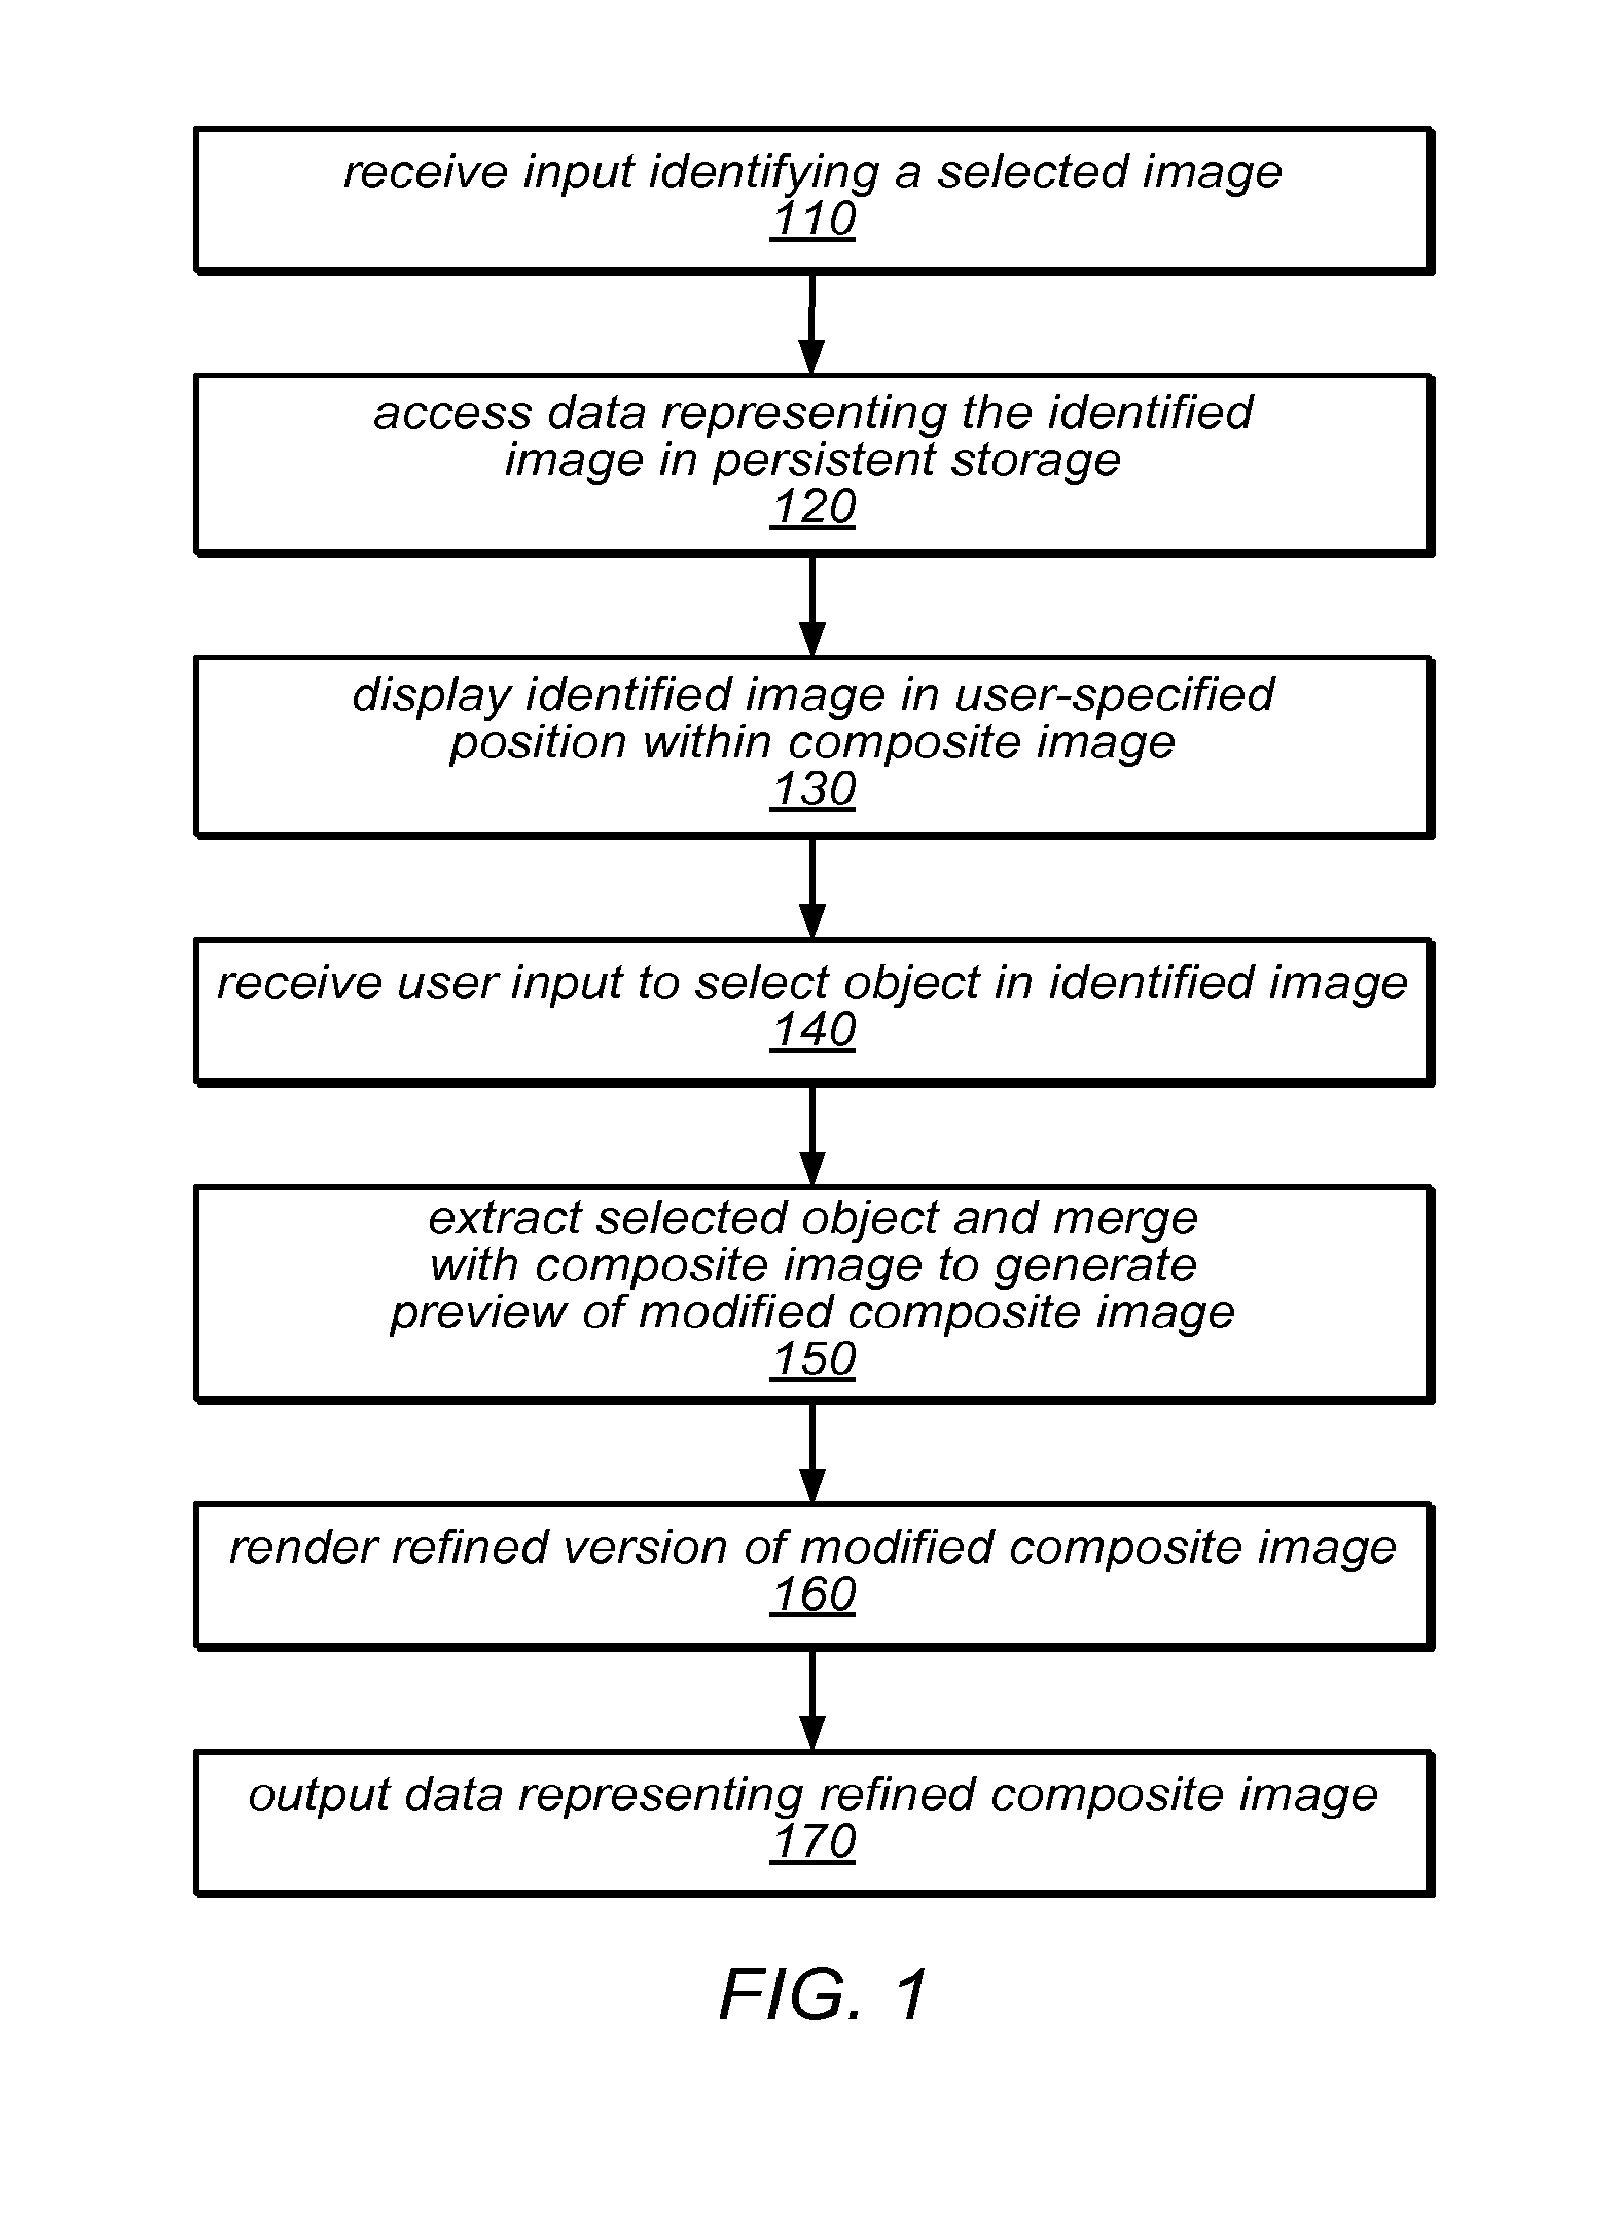 System and Method for Image Composition Using Non-Destructive Editing Model and Fast Gradient Solver